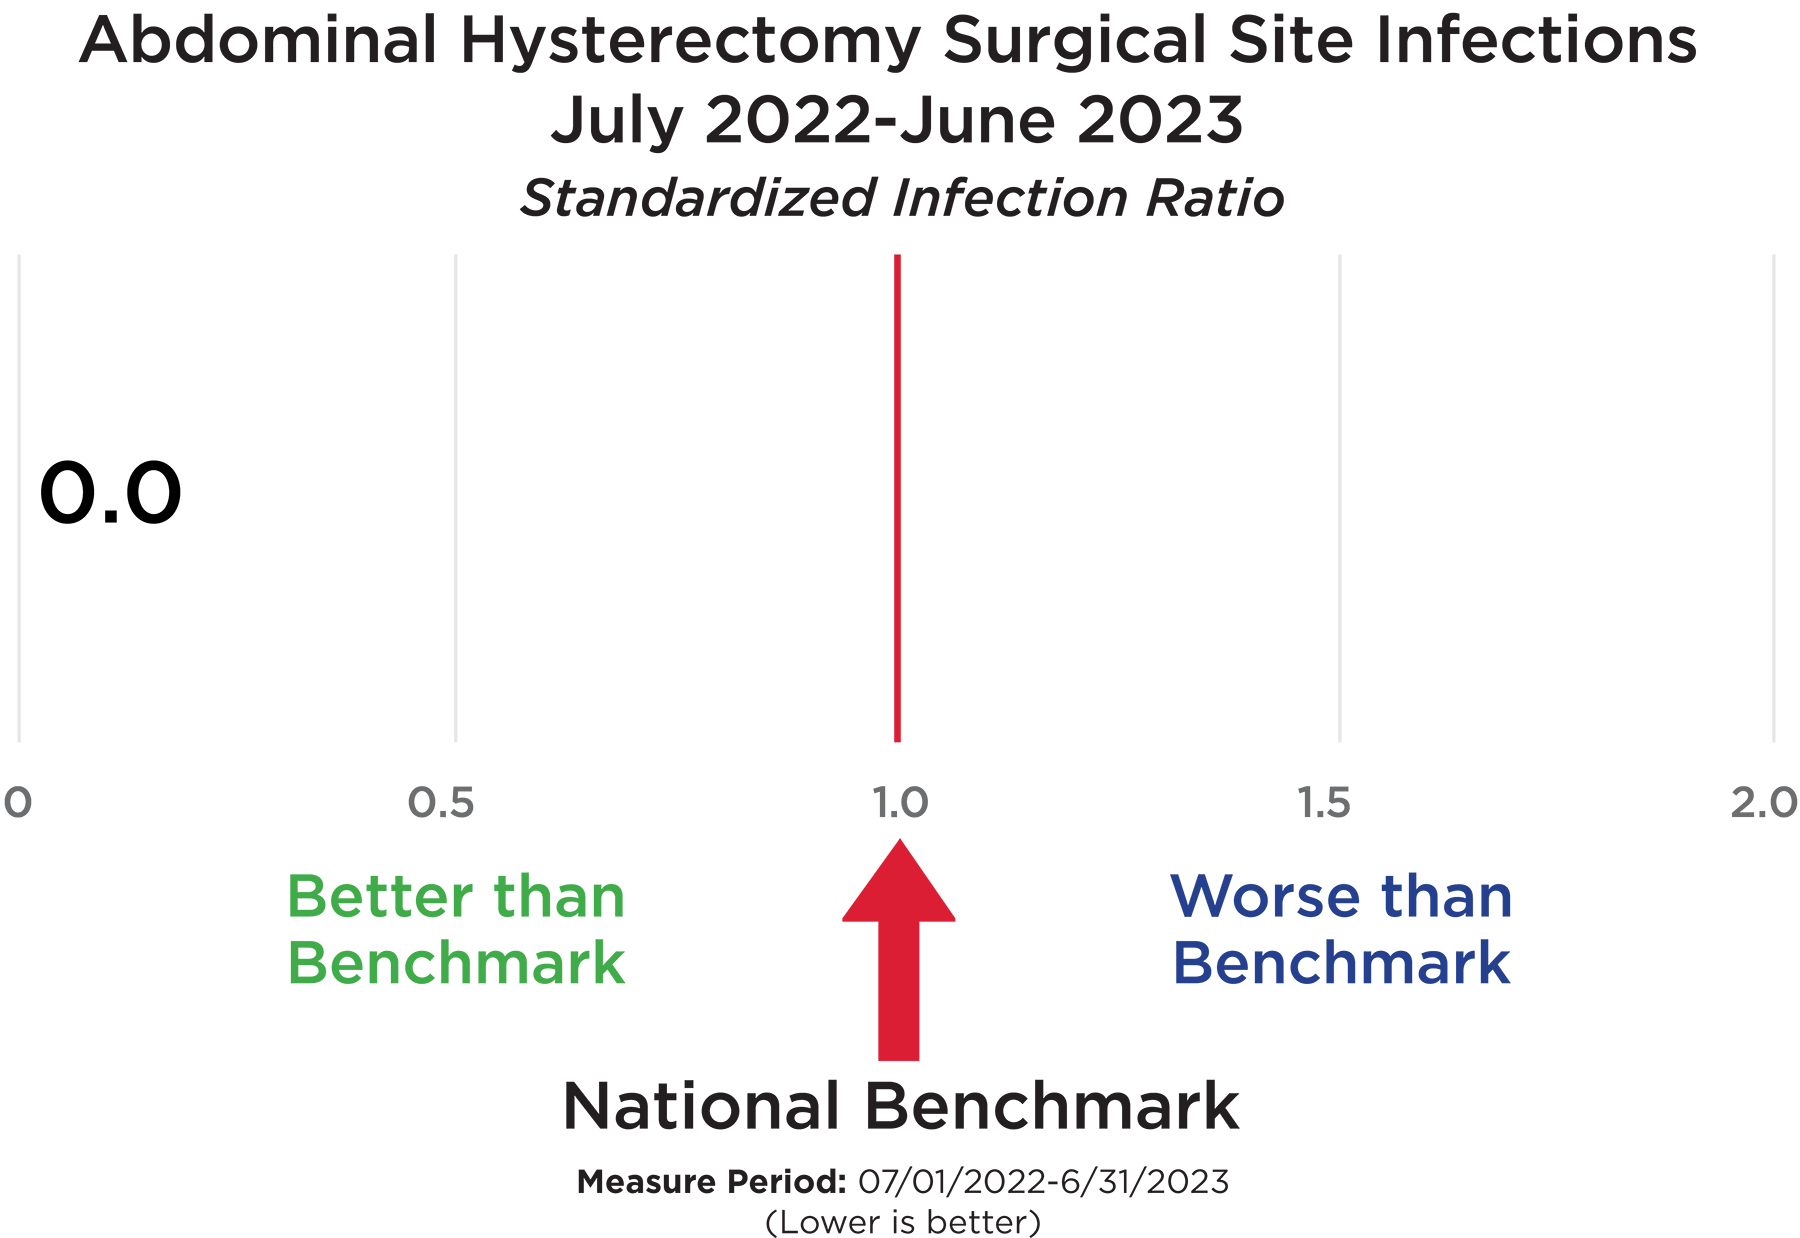 Abdominal Hysterectomy Surgical Site Infections July 2022-June 2023